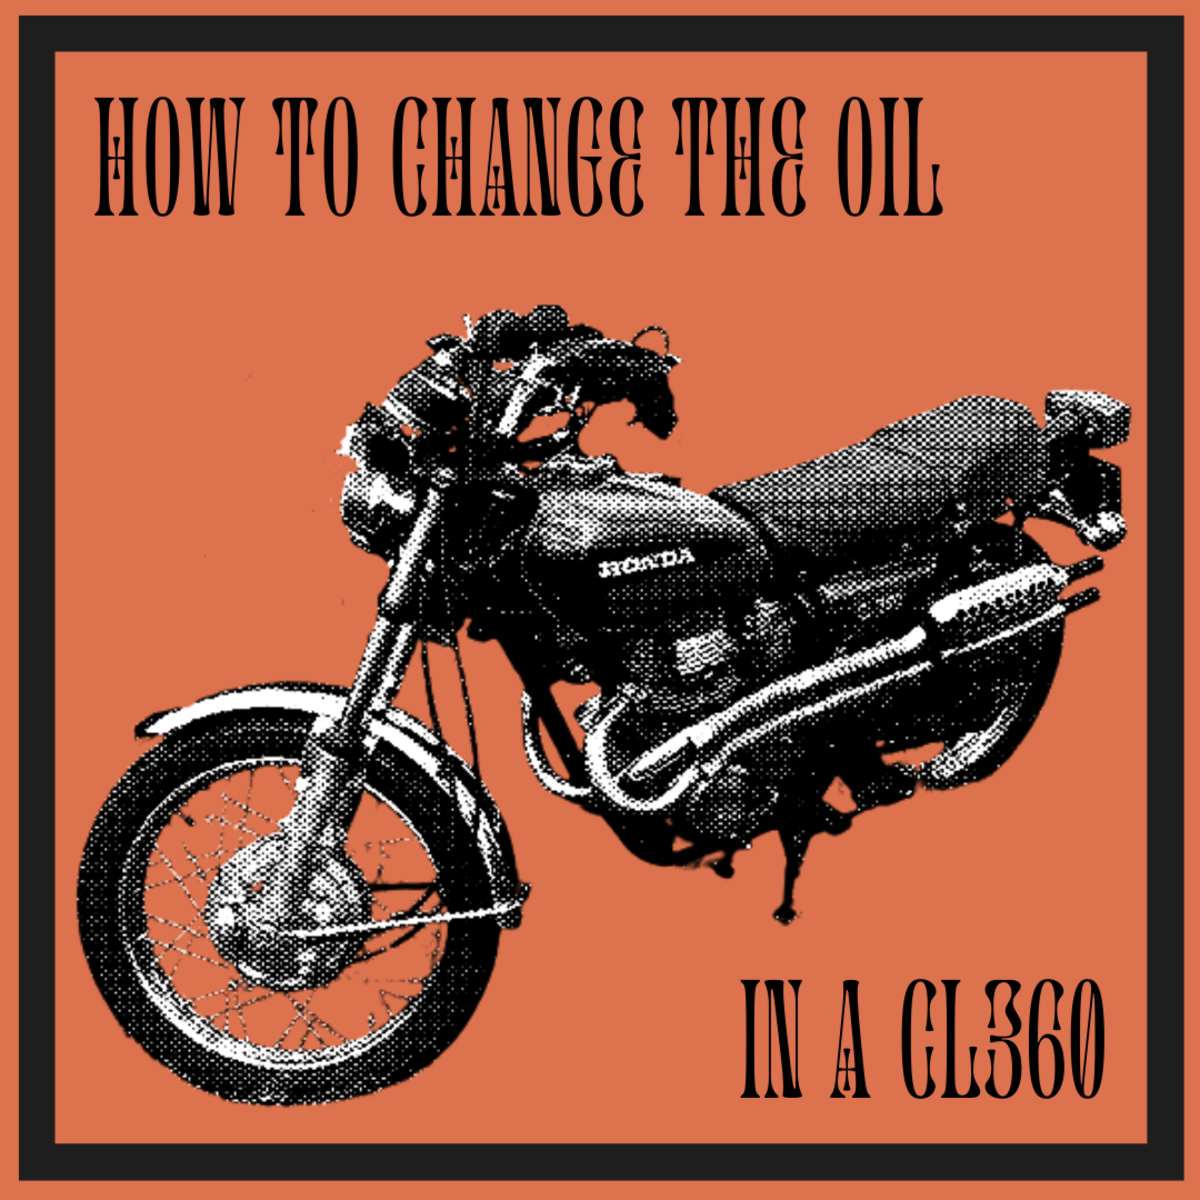 How to Change the Oil on a Honda CL360